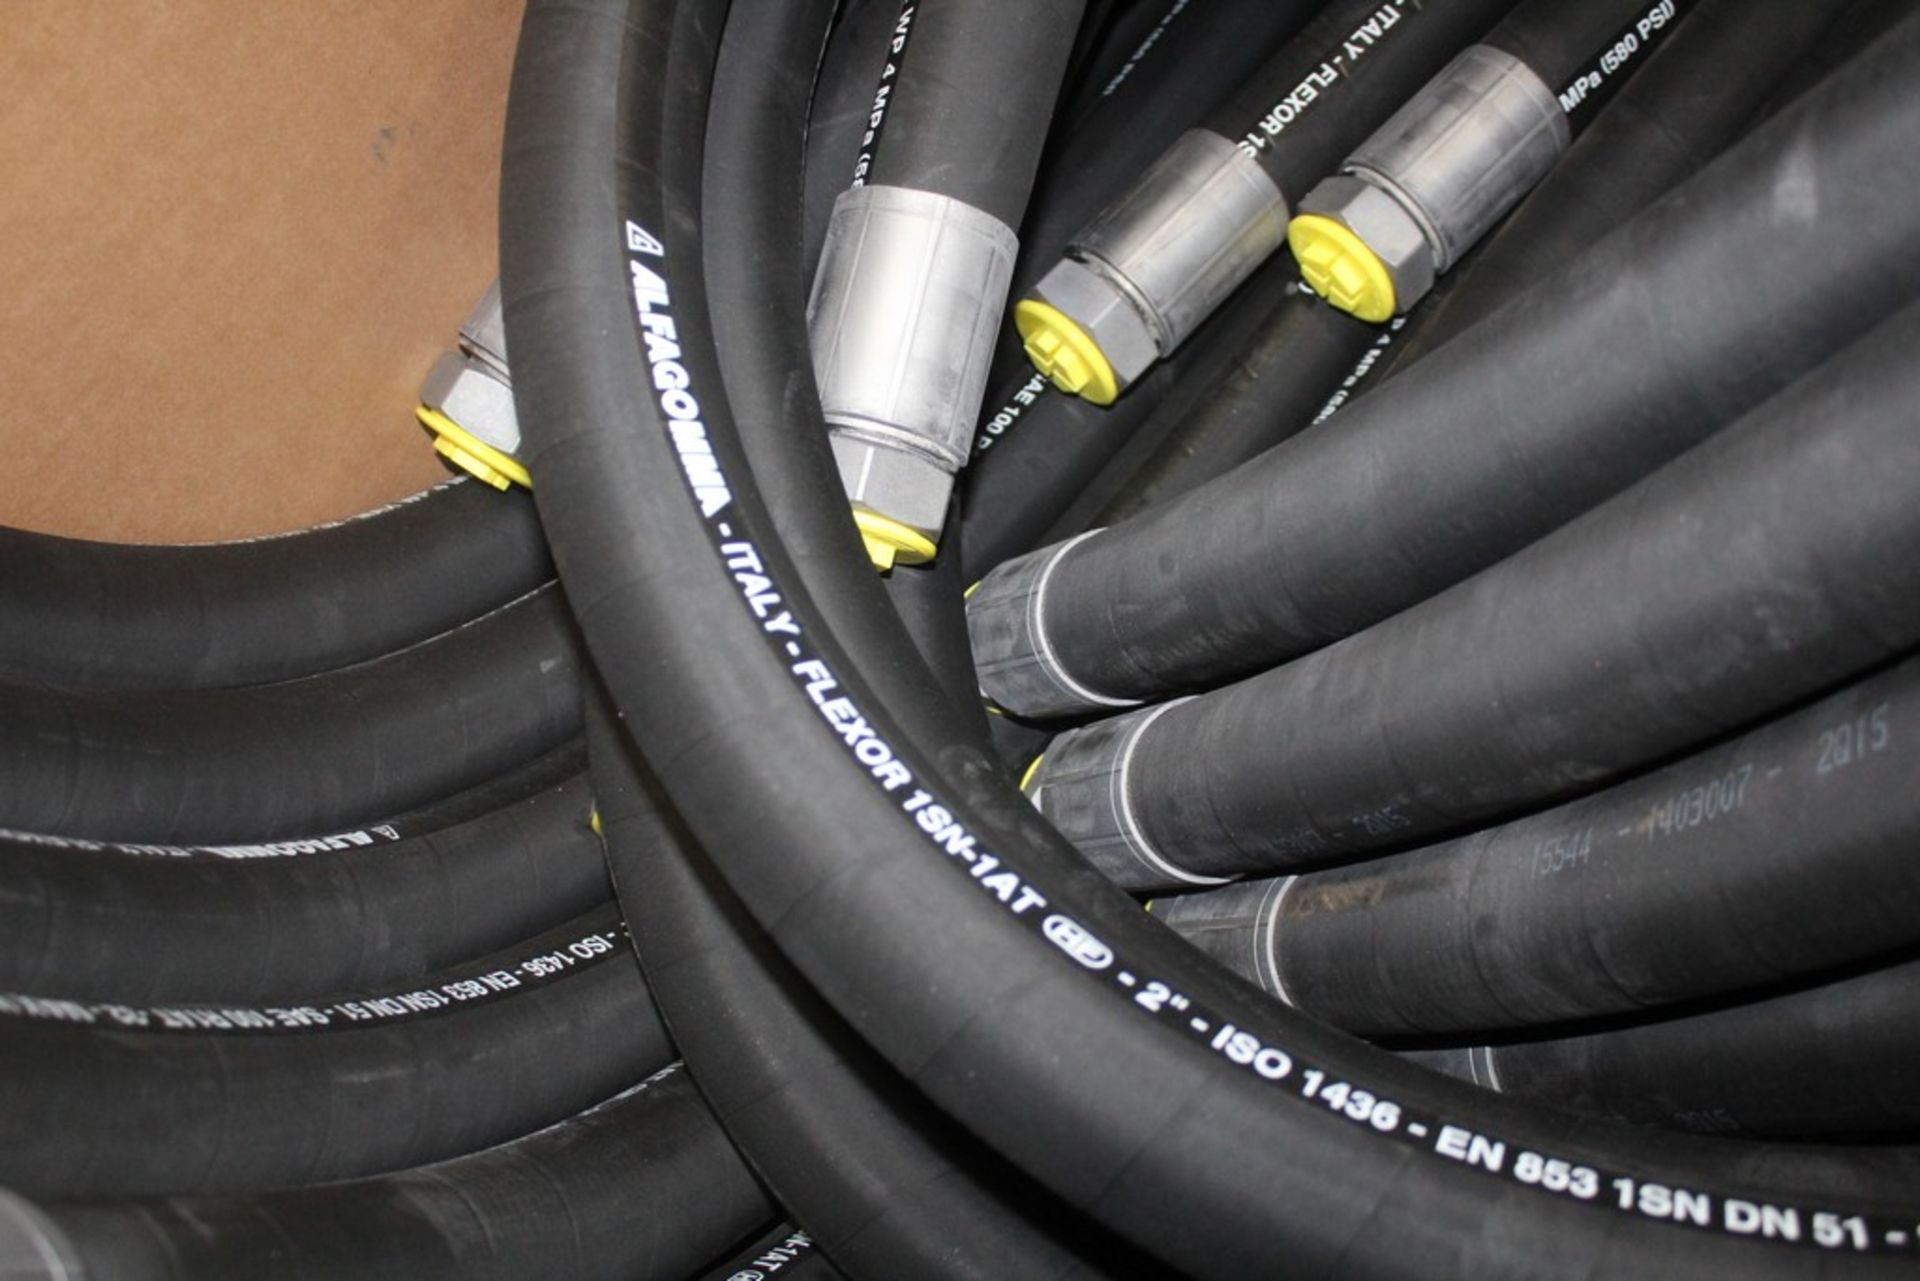 FLEXION HYDRAULIC HOSE, 2" IN CRATE - Image 3 of 3